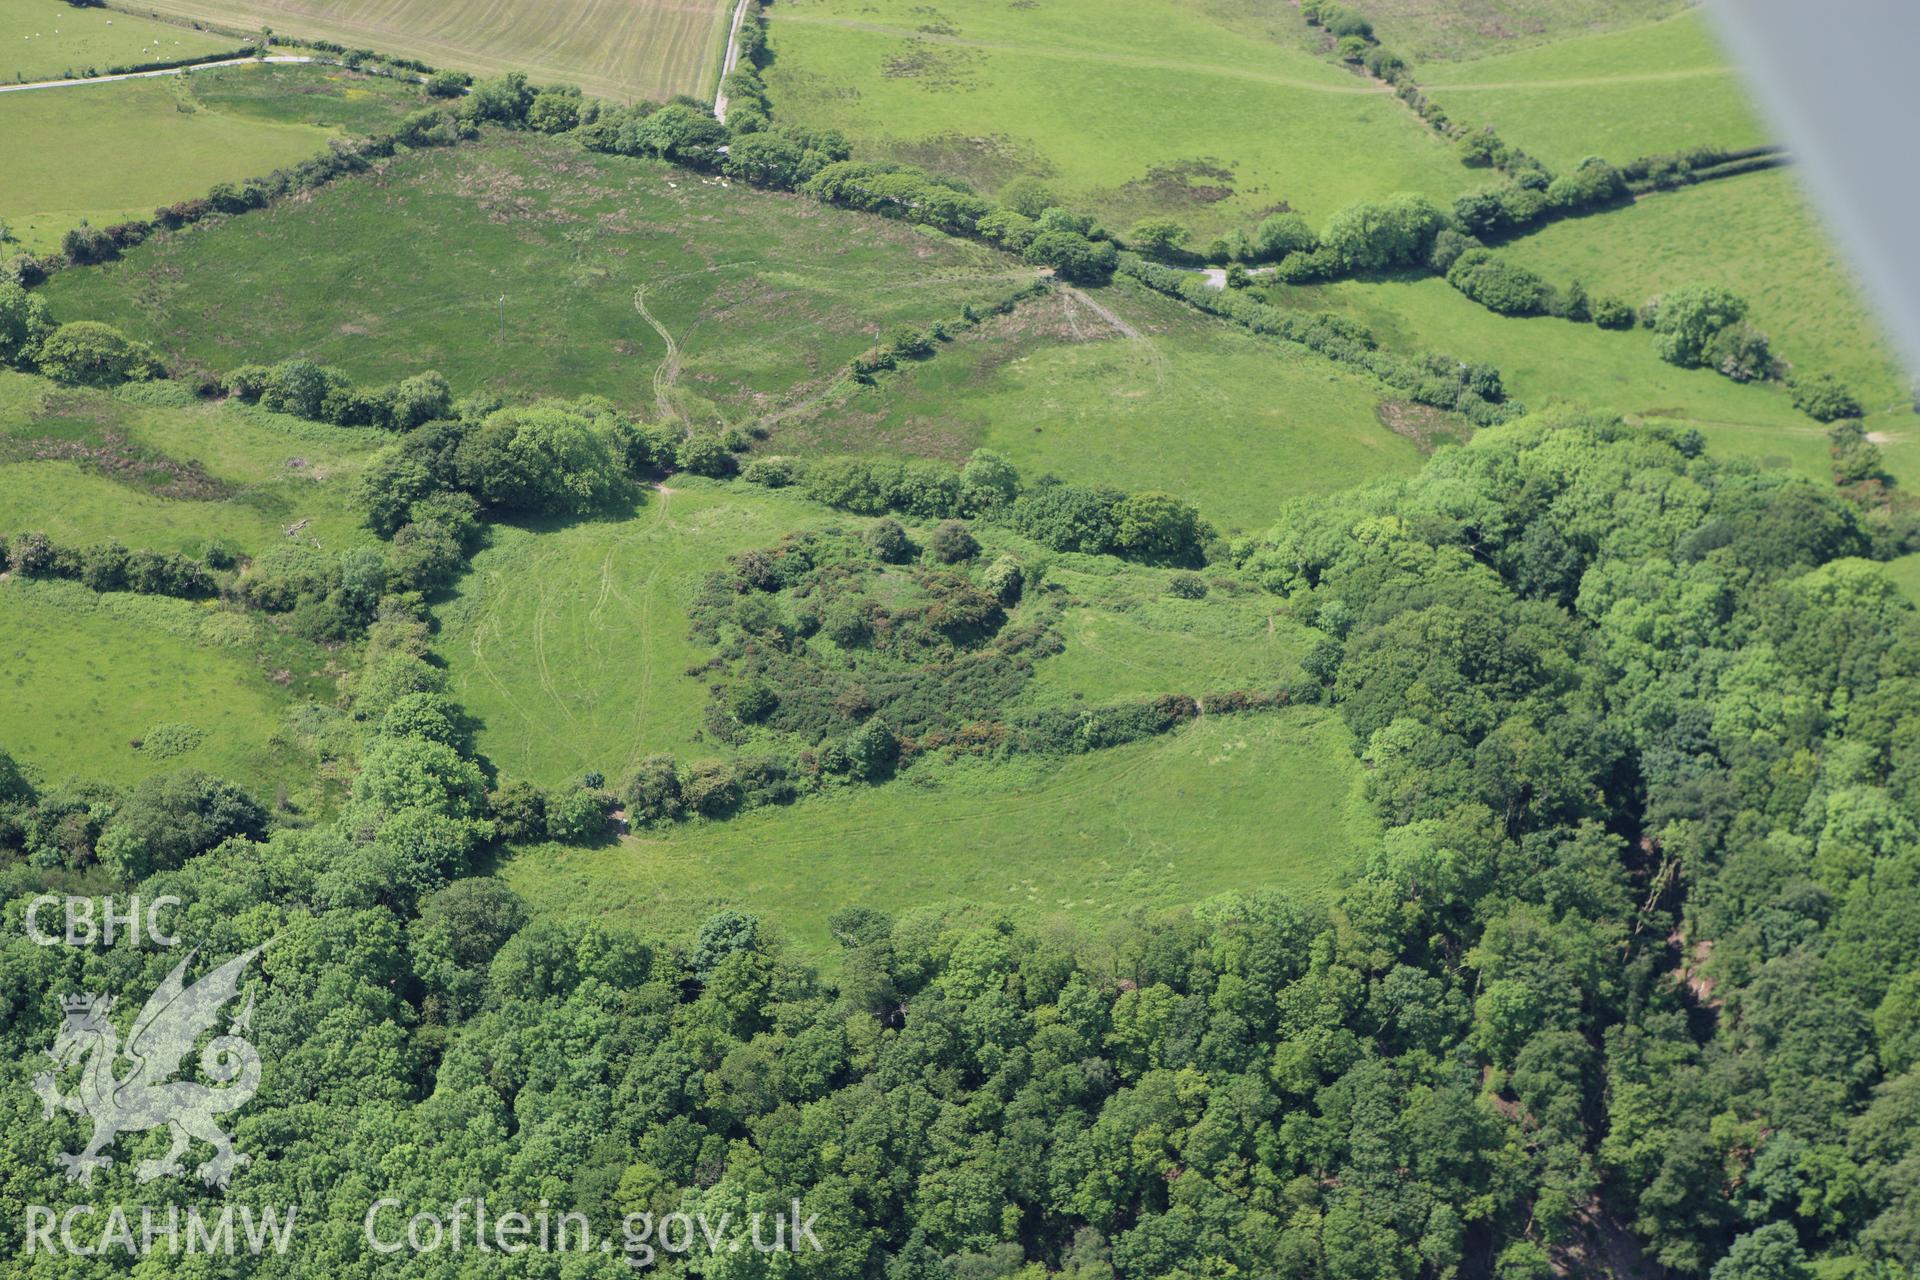 RCAHMW colour oblique aerial photograph of Castell Gwallter, Llandre. Taken on 02 June 2009 by Toby Driver